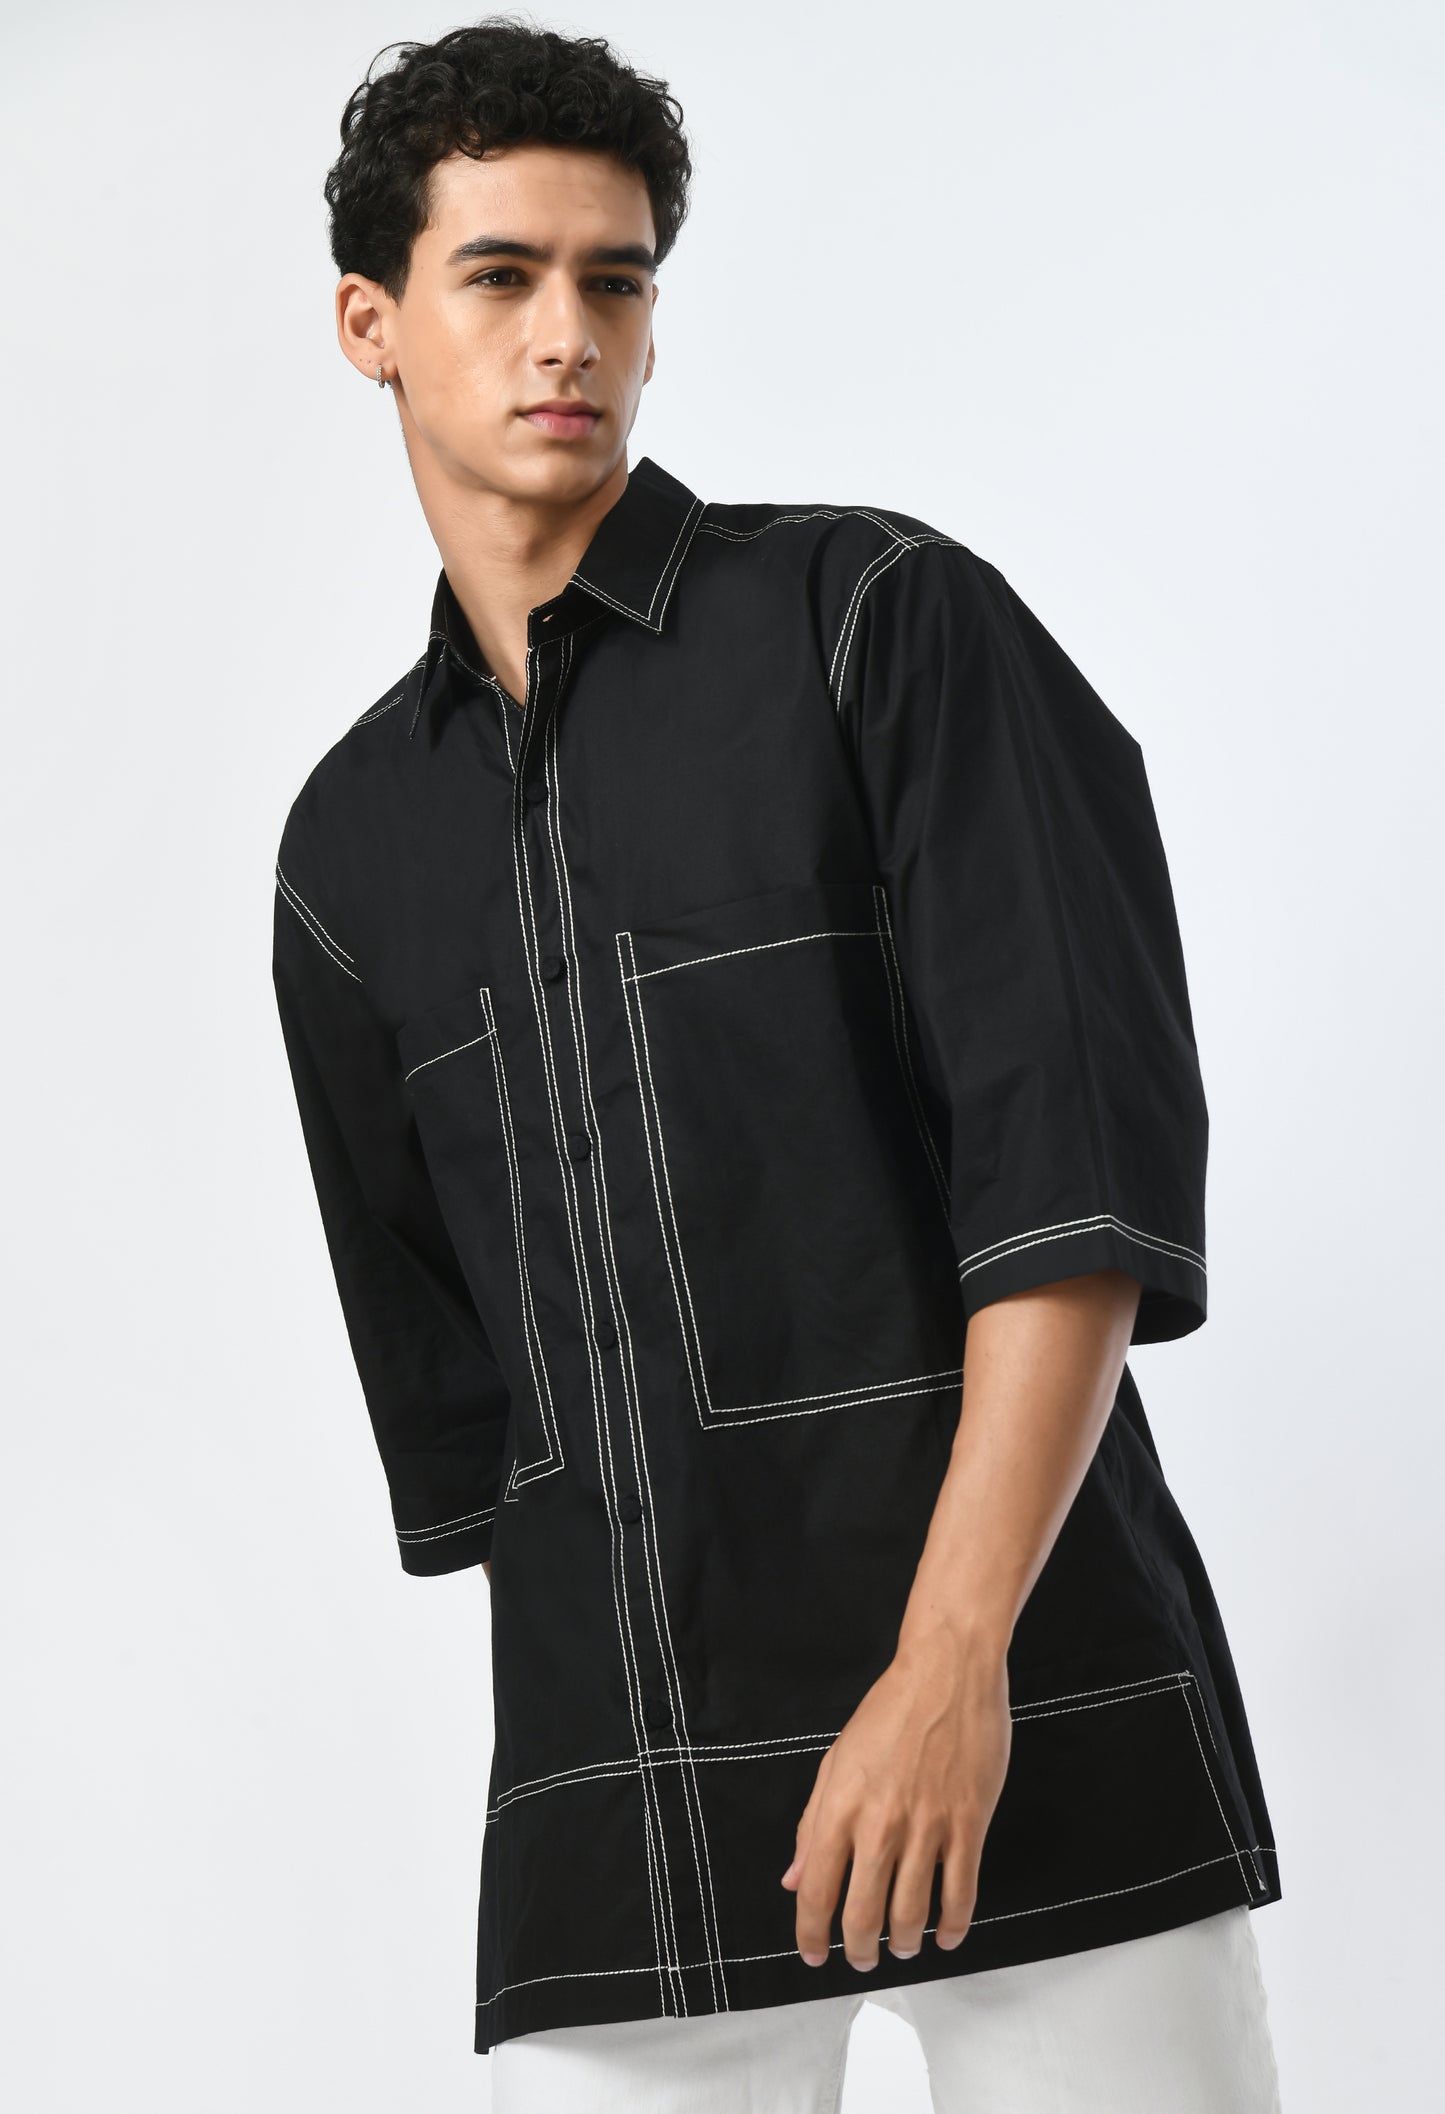 Black unisex shirt with a classic collar.